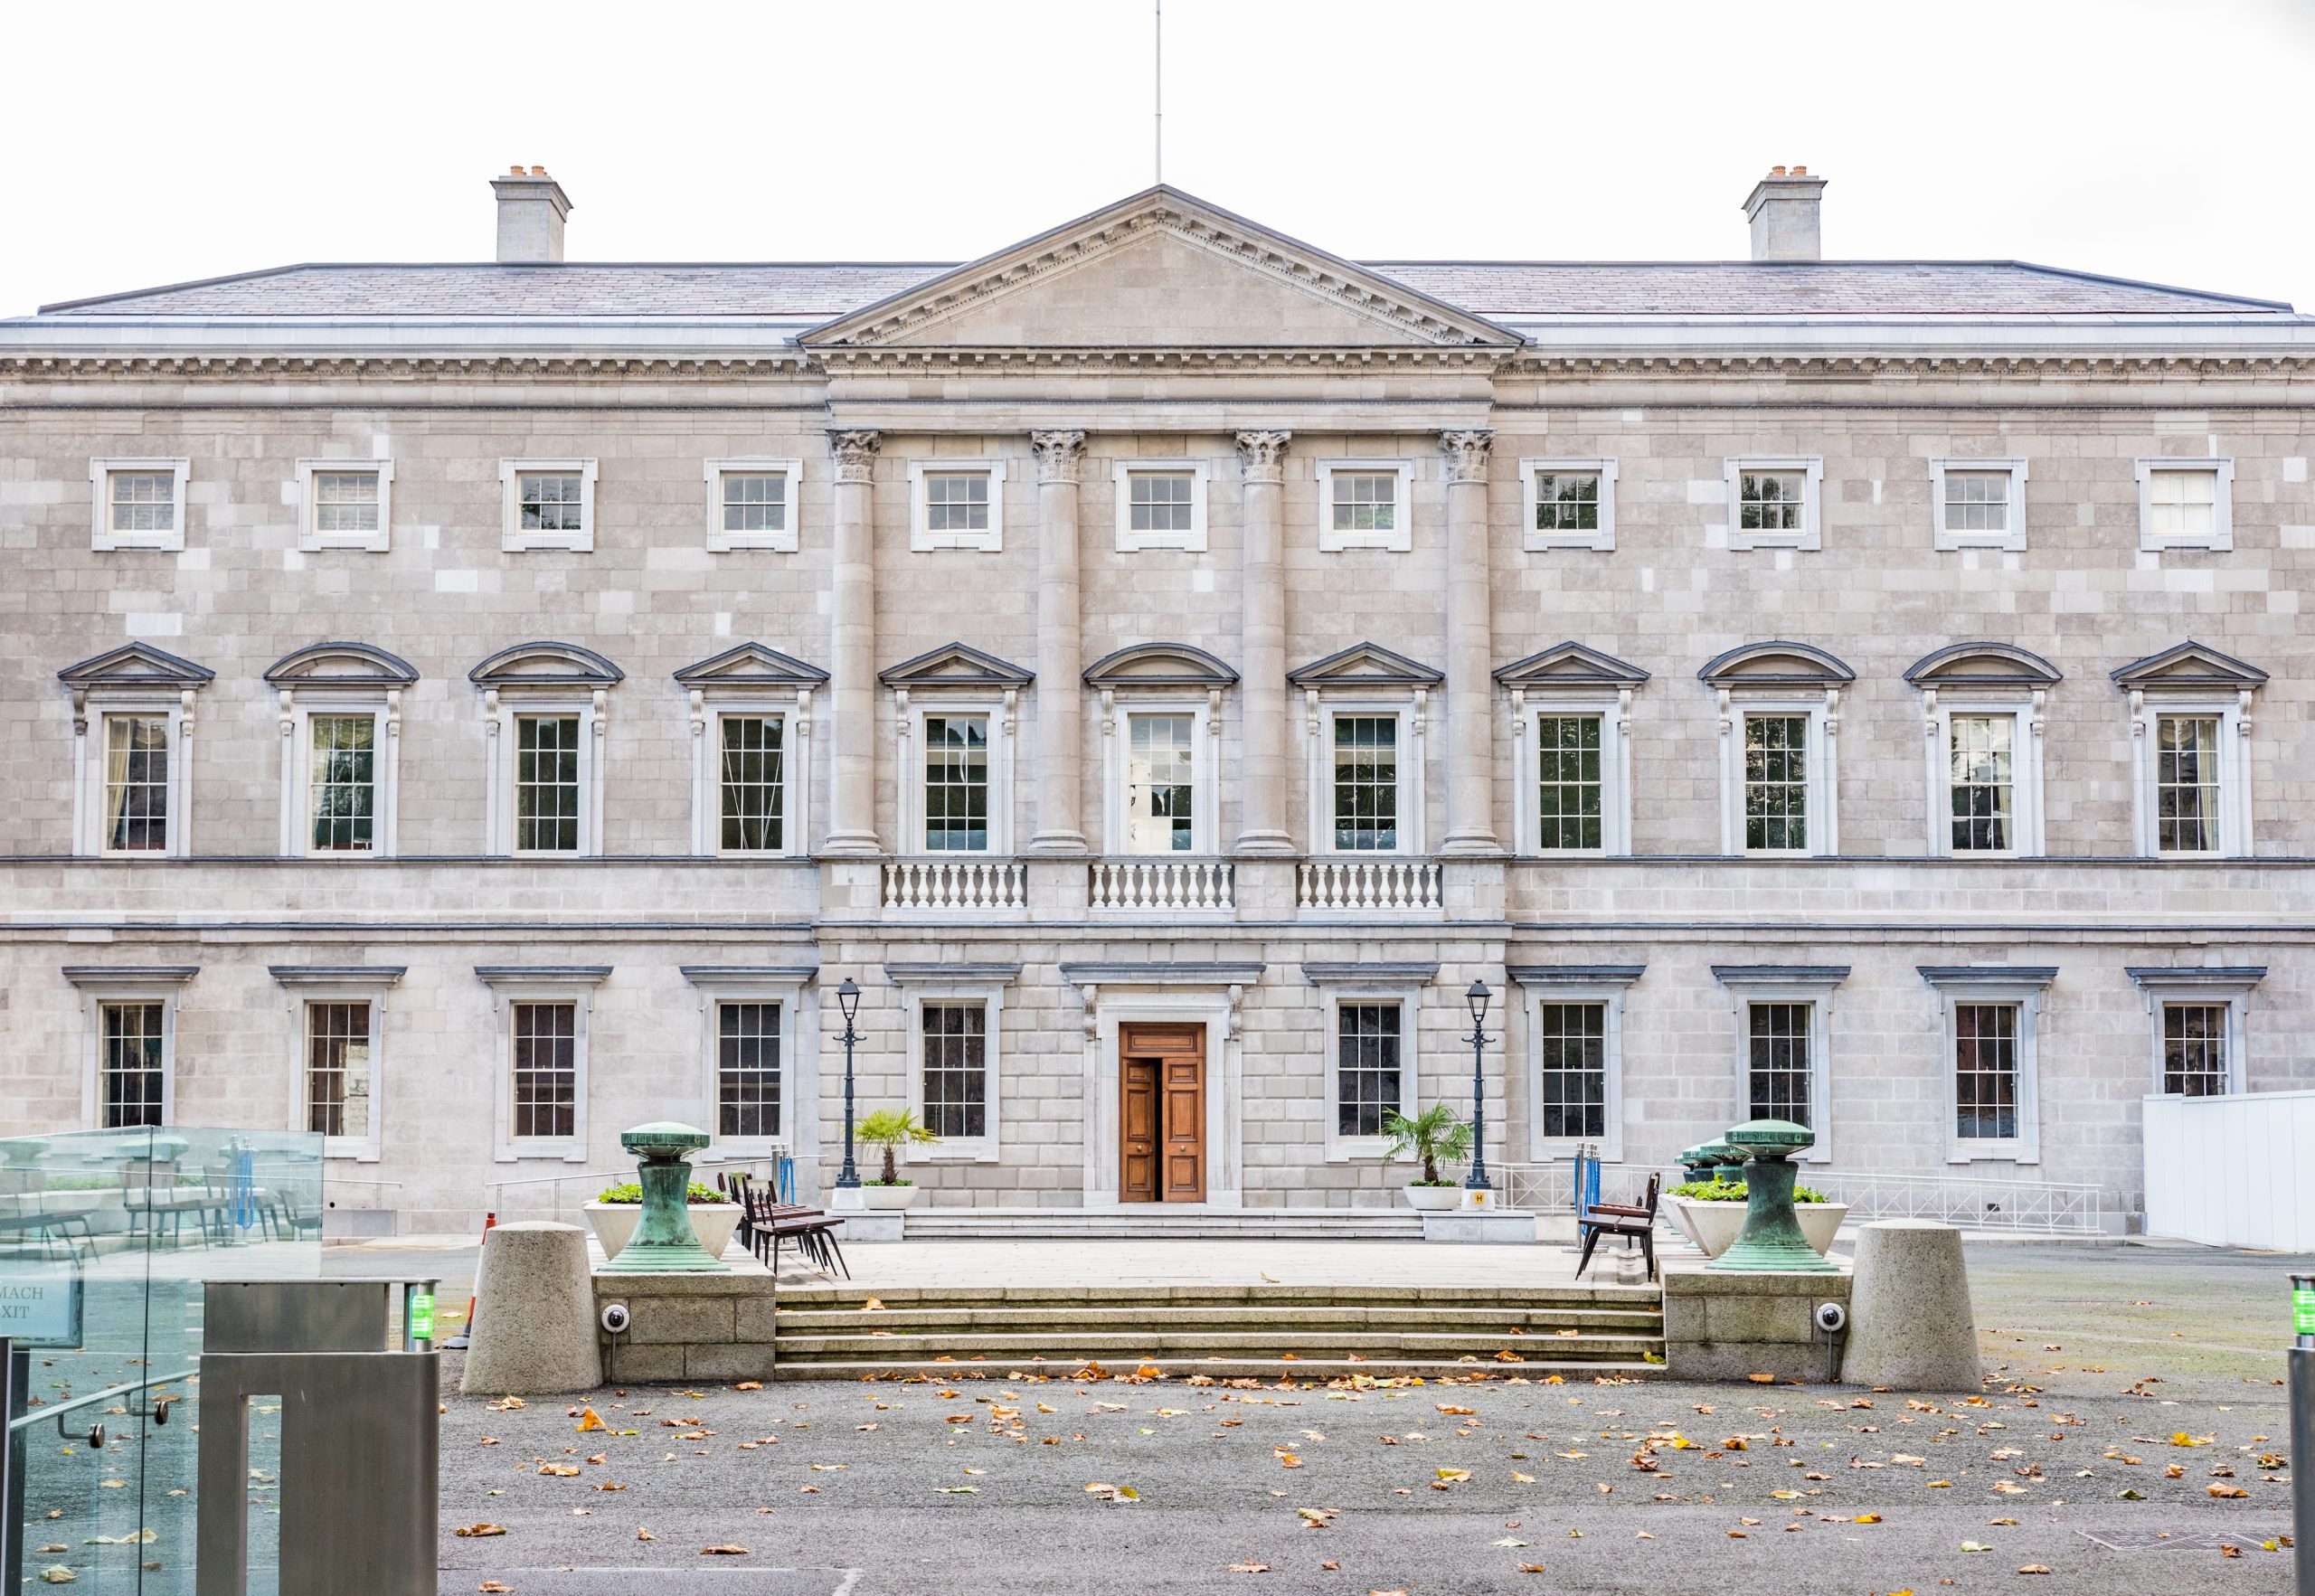 Leinster House, seat of Irish government